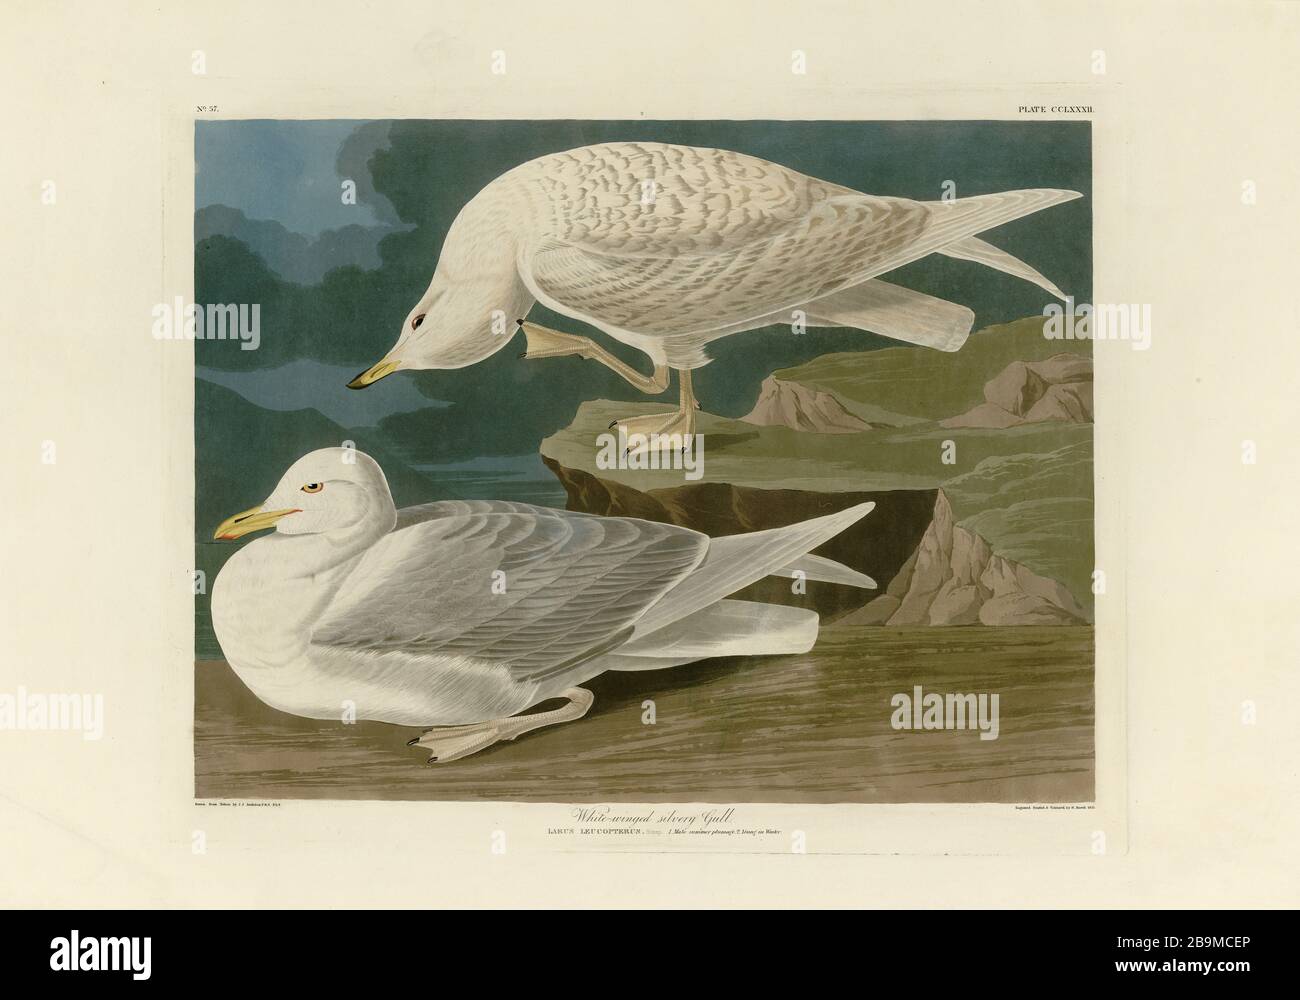 Plate 282 White-winged Silvery Gull (Iceland Gull) The Birds of America (1827–1839) John James Audubon, Very high resolution and quality edited image Stock Photo